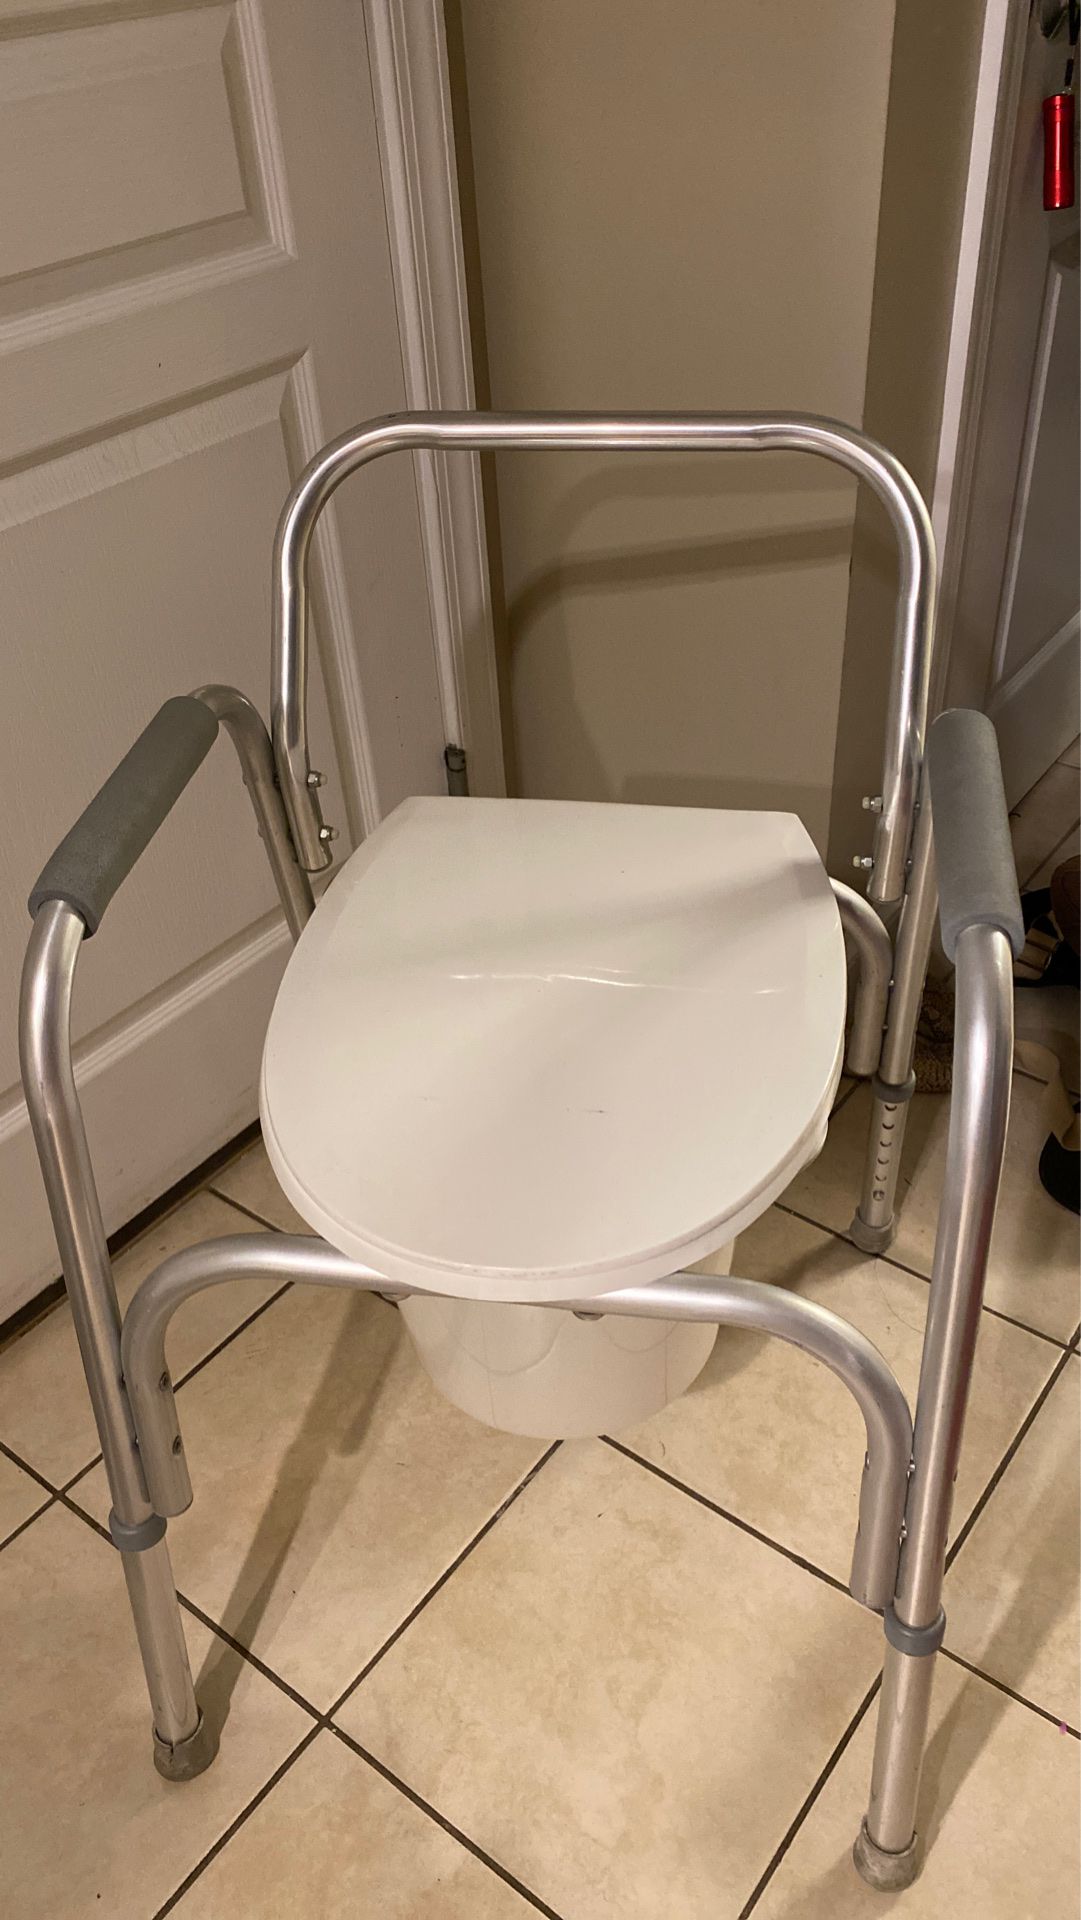 Bedside commode / portable toilet (new)